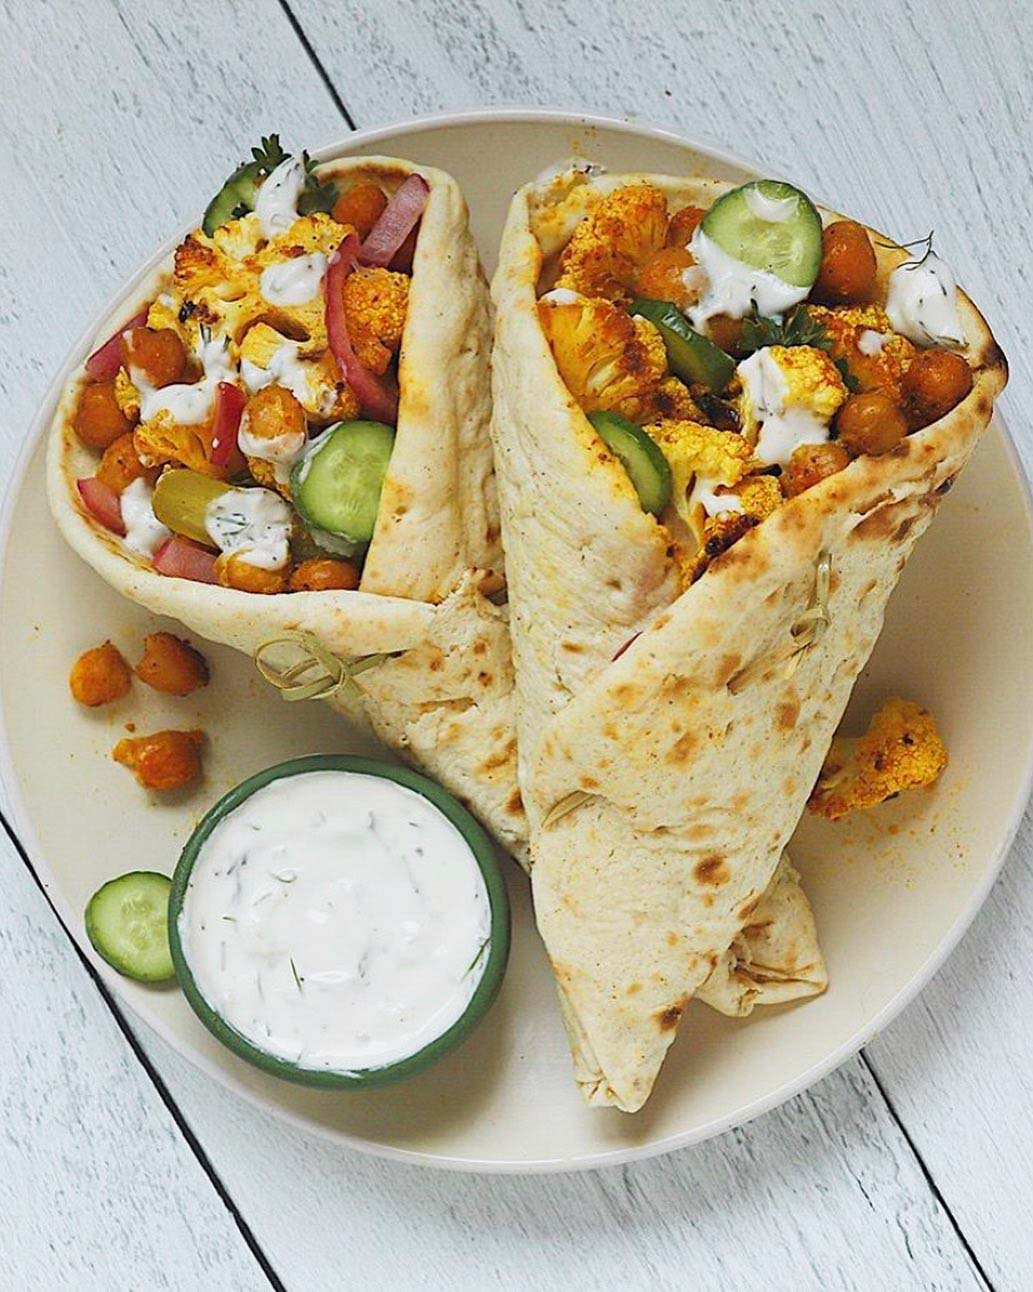 Roasted Cauliflower & Chickpea Shawarma Wrap recipe served on a plate with dip.